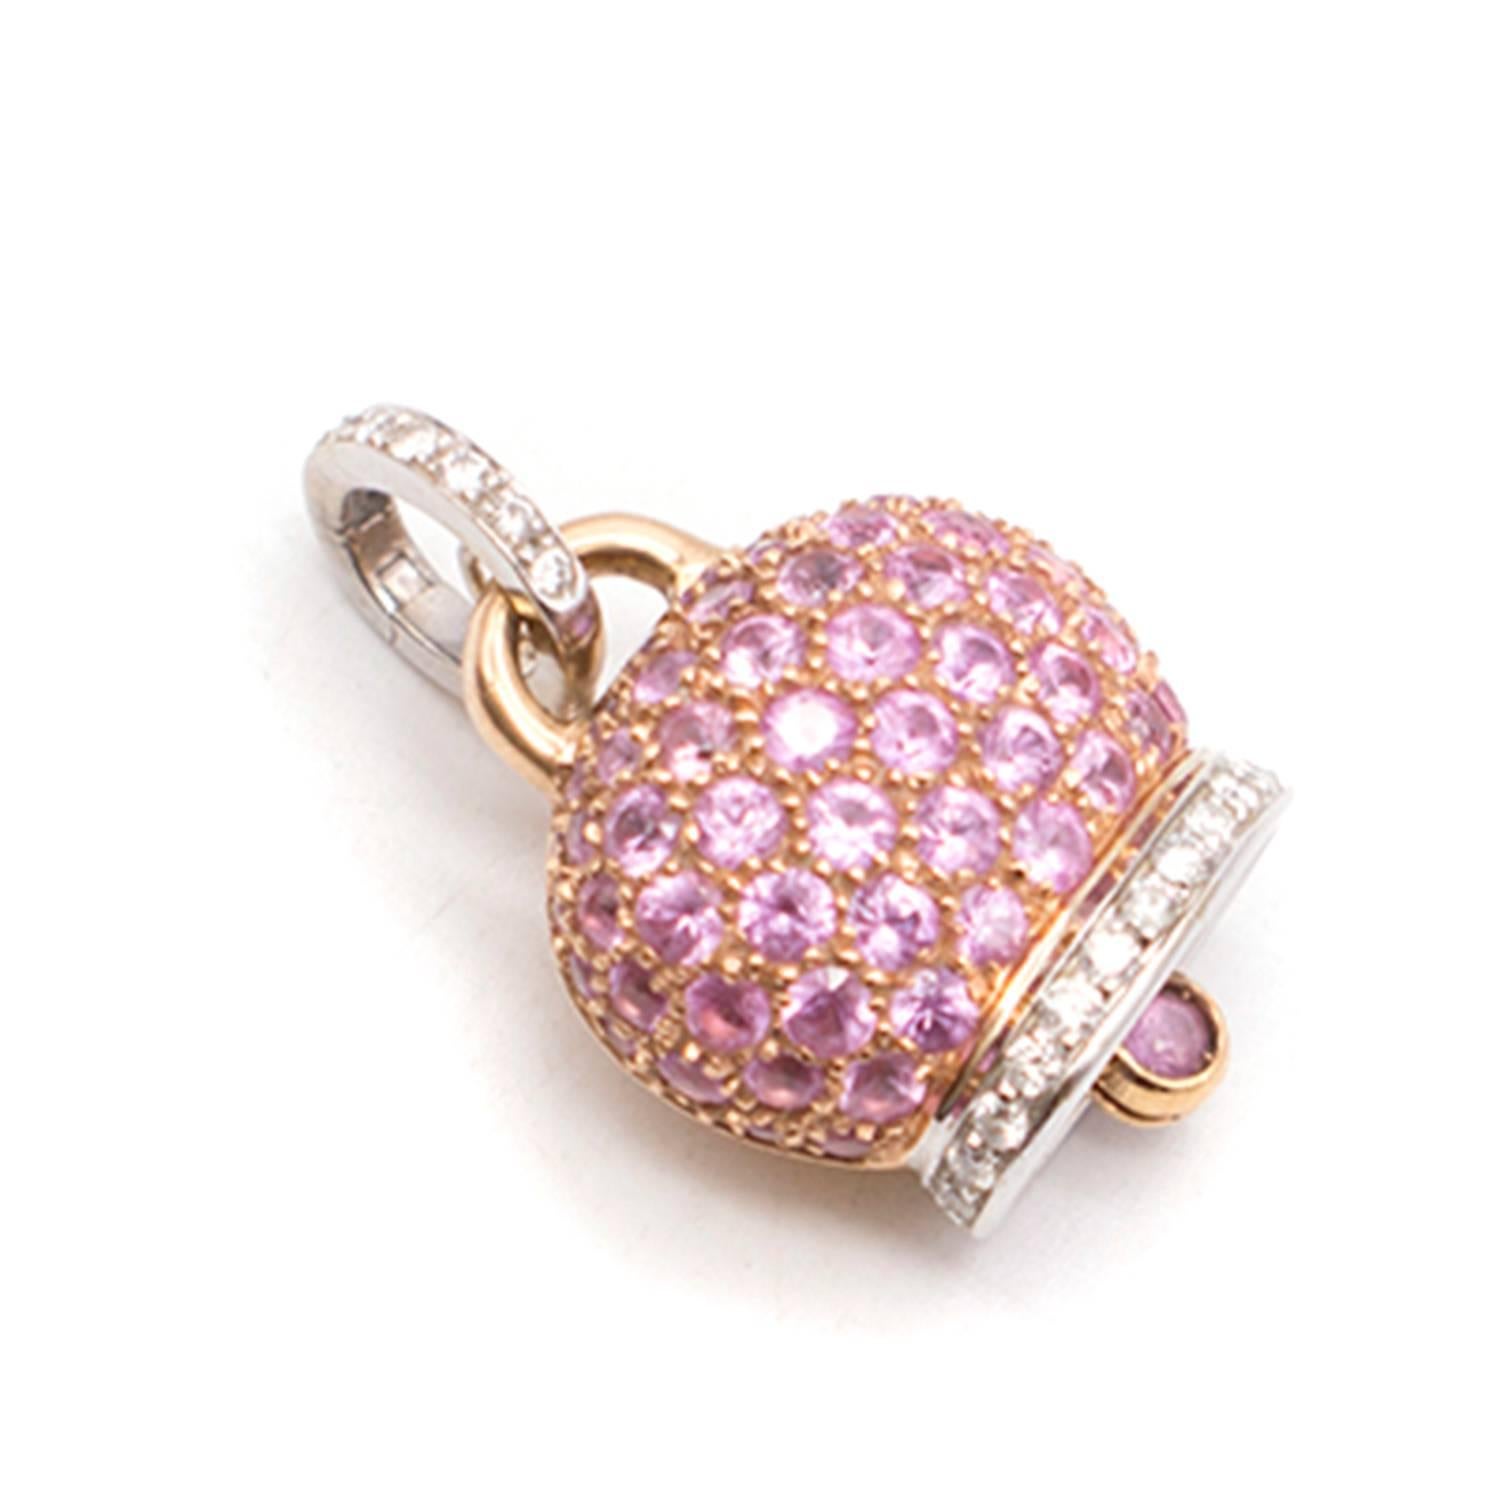 Chantecler Campanelle rose gold Sapphire medium bell charm. 18k rose and white gold pink sapphire medium bell charm featuring a pave diamond top and bottom. Total diamond weight 0.23cts. 

Accompanied by Chantecler box. 

Condition: 9.5/10

Please